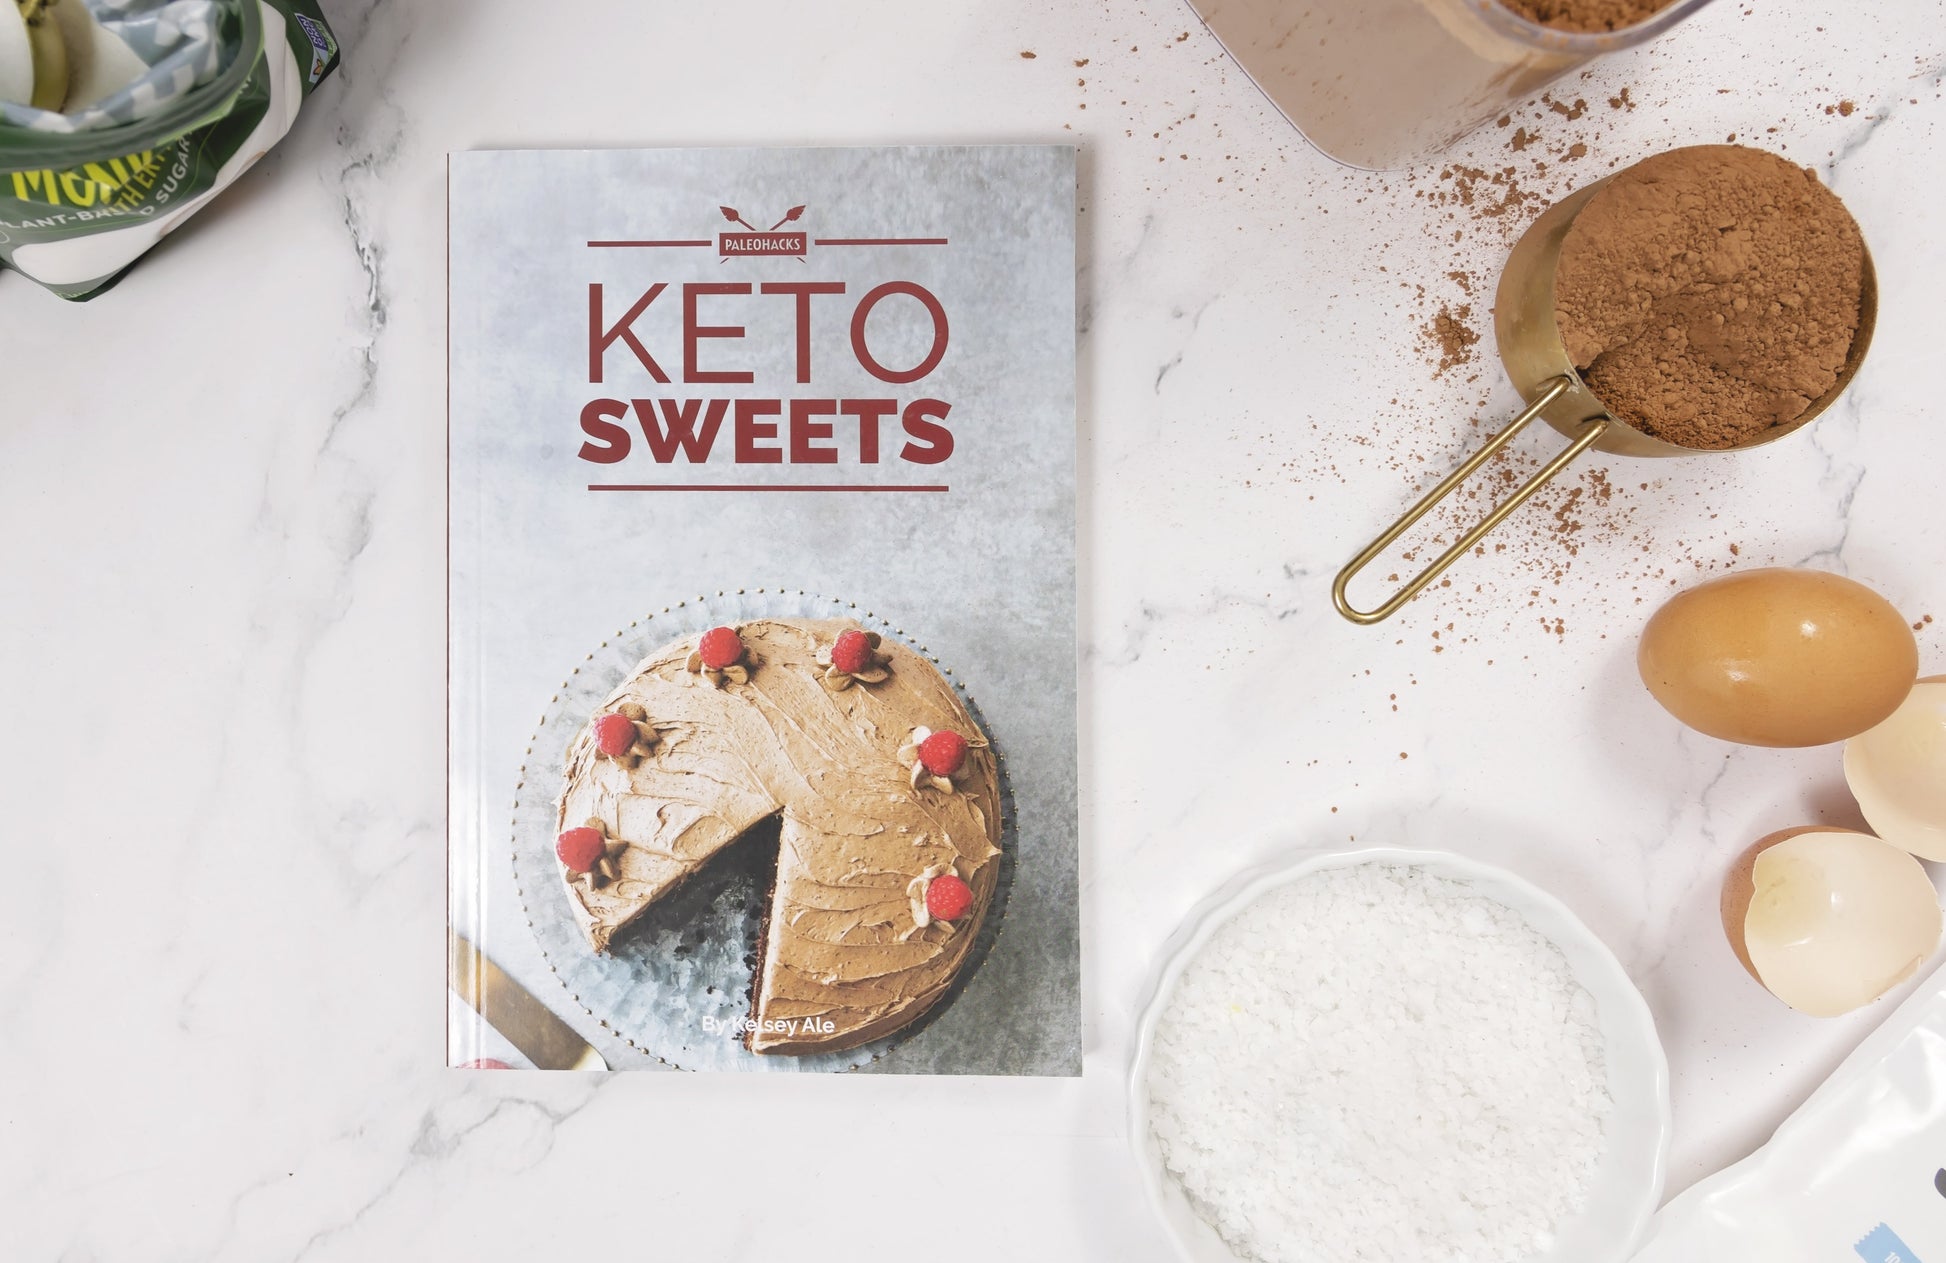 The Keto Sweets Cookbook  placed on a white marble surface. A bowl of flour, cacao powder, and eggs can be seen on the right.